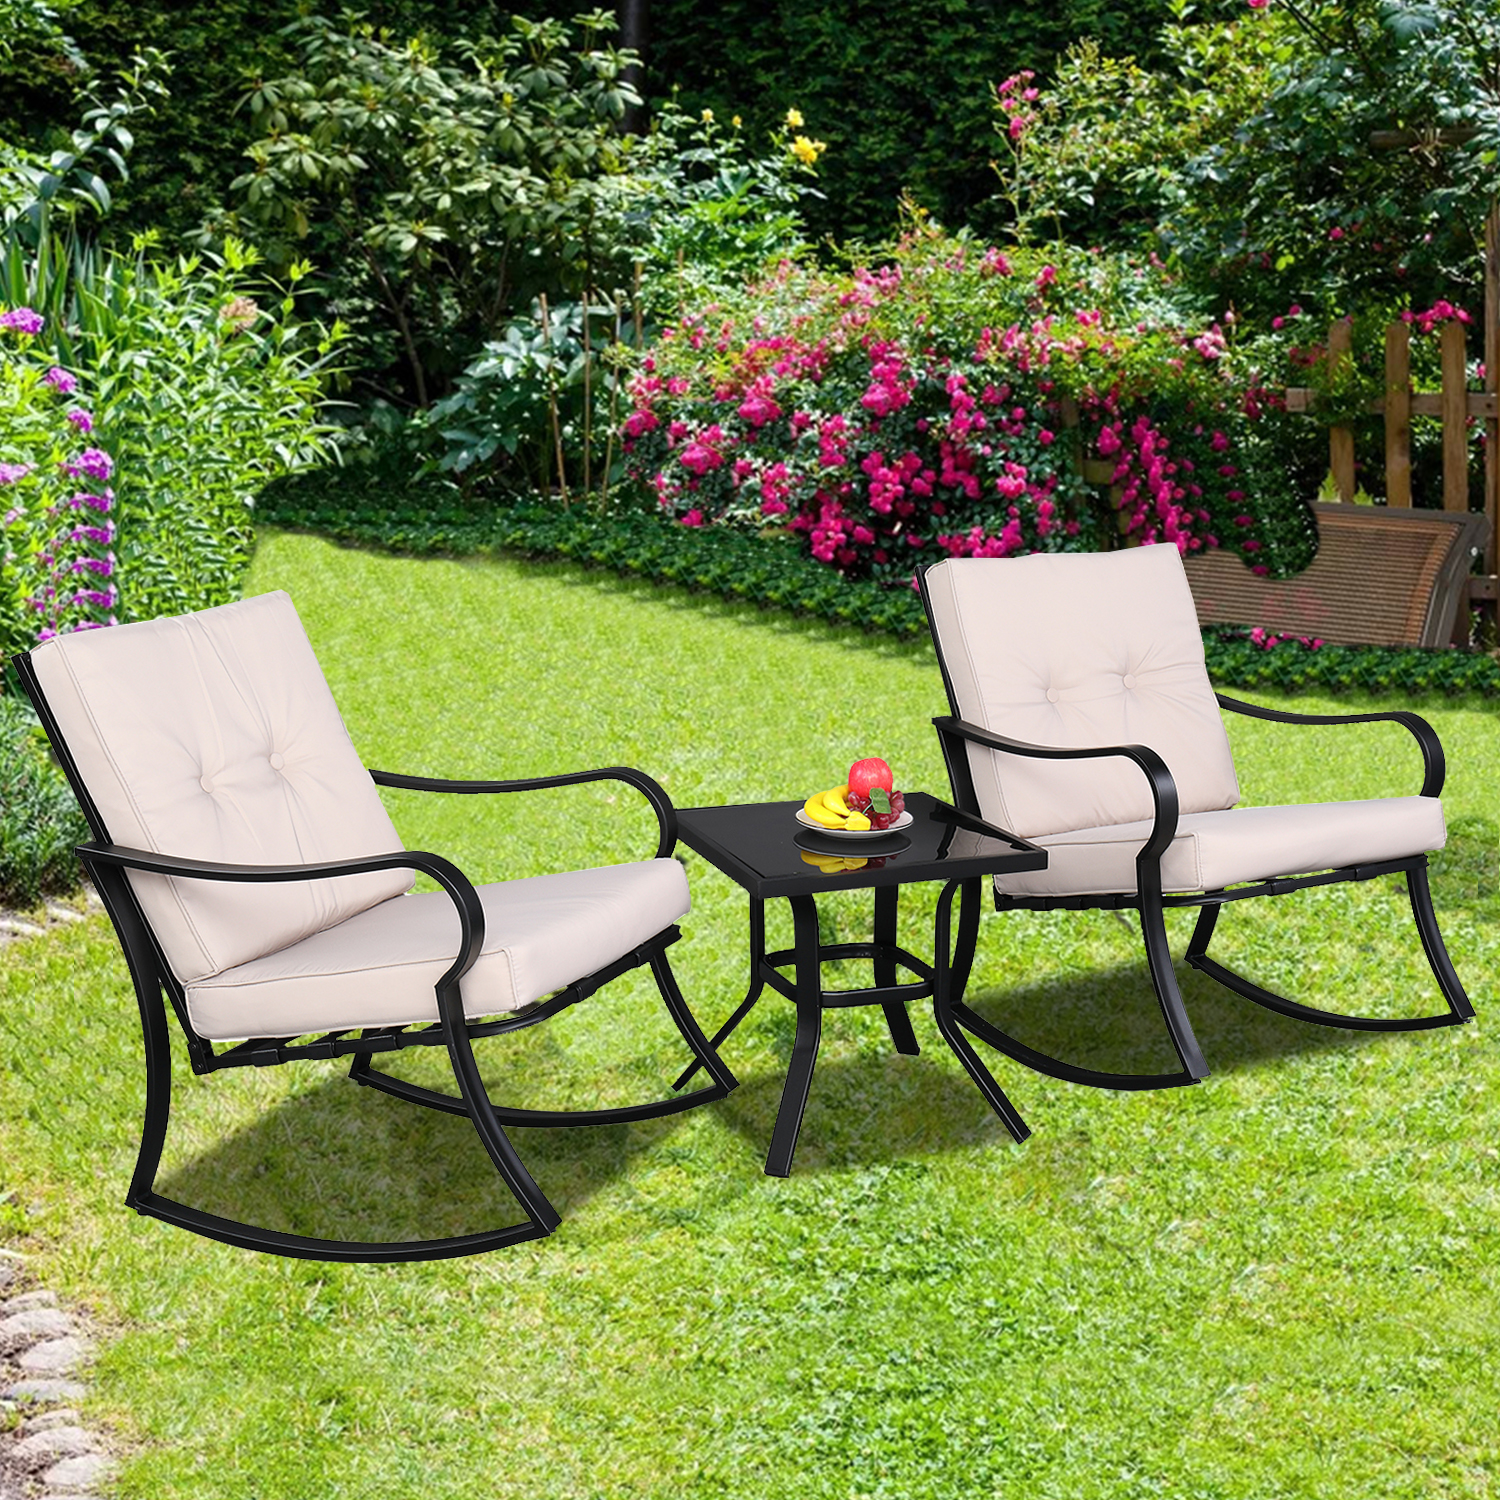 3 Piece Rocking Chair Set, Patio Furniture with Rocking Chairs and Coffee Table, Outdoor Rocking Chair Sets for Lawn, Yard, Garden, Rocker Bistro Set, Patio Lounge Chair, Beige Cushion, W10682 - image 1 of 11